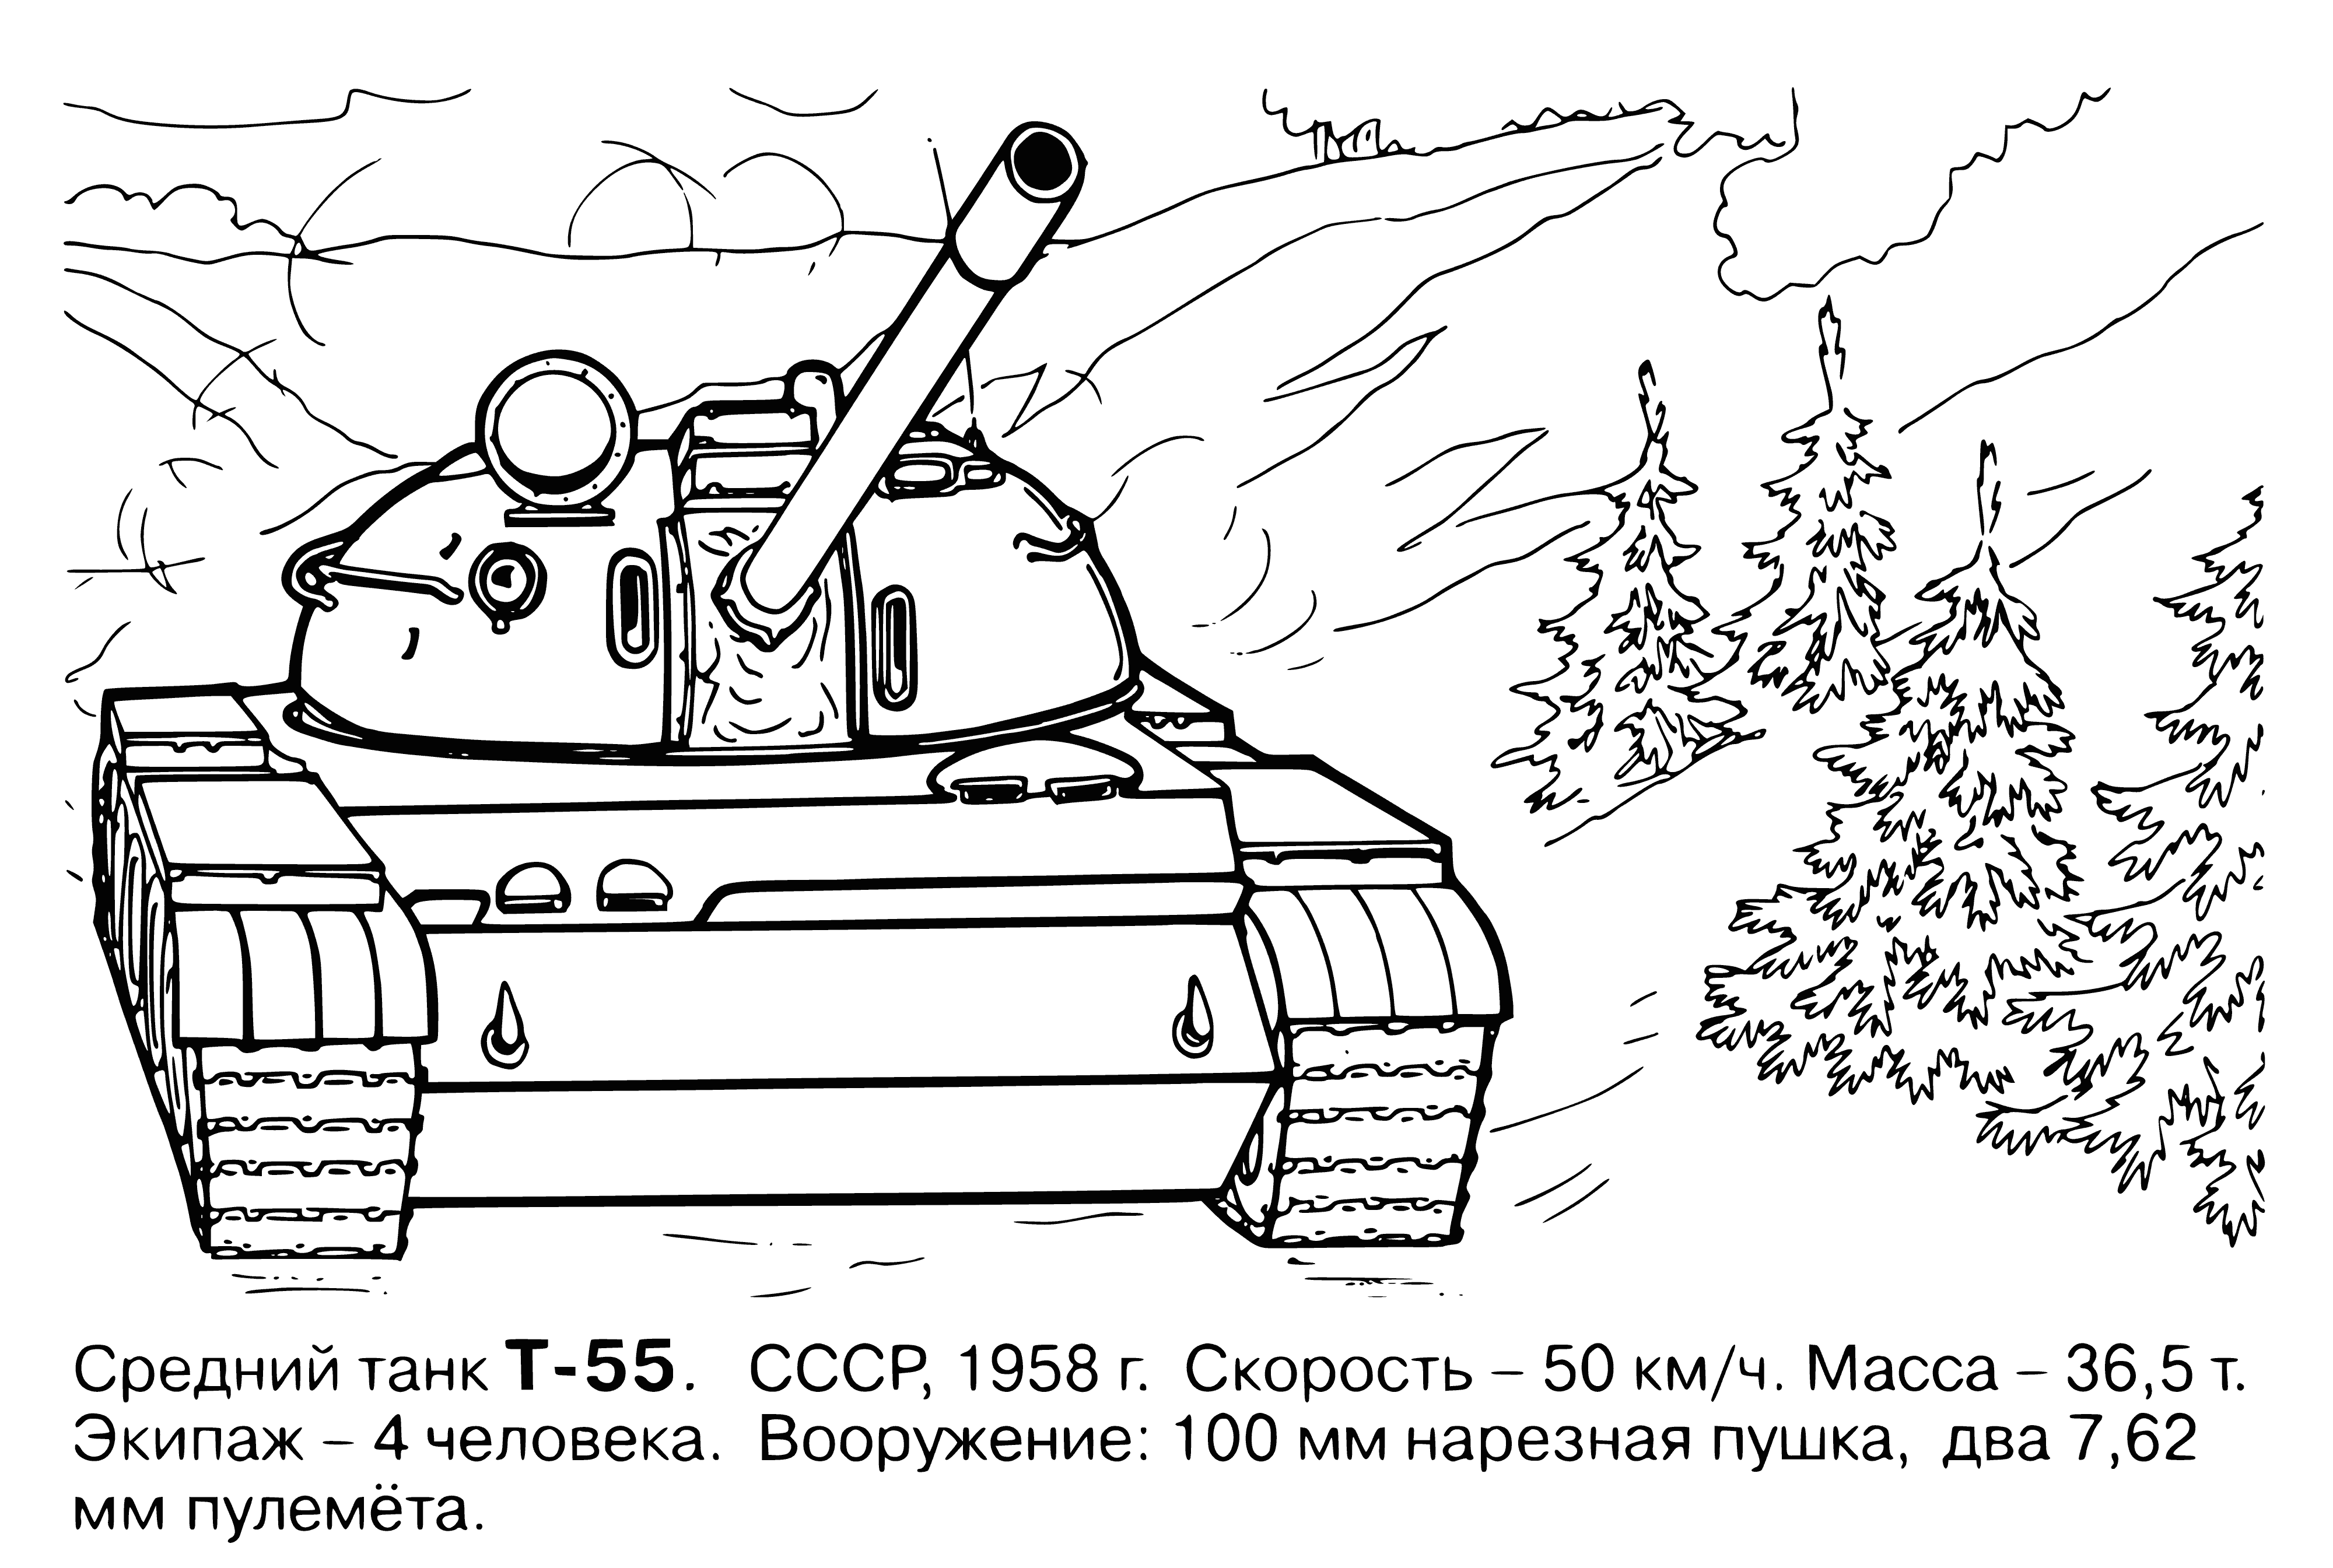 coloring page: 140 characters: Two large metal tanks with guns in a desert scene, plus small vehicle & possible building in background.